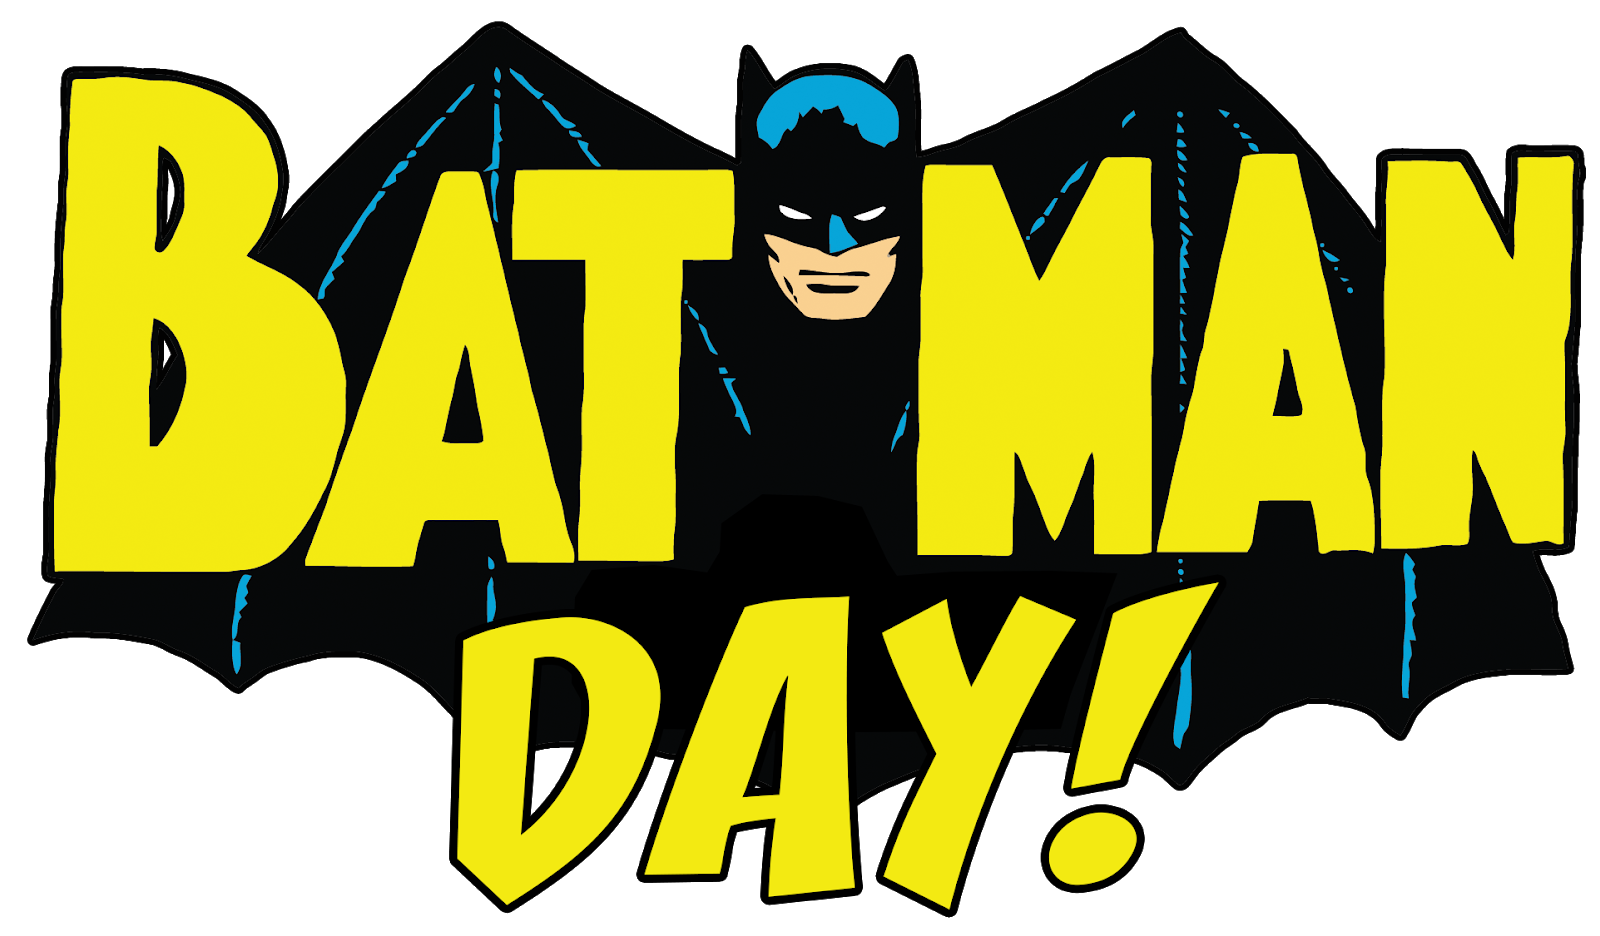 The Doctor Knows: Batman Day is here this Saturday, September 21!